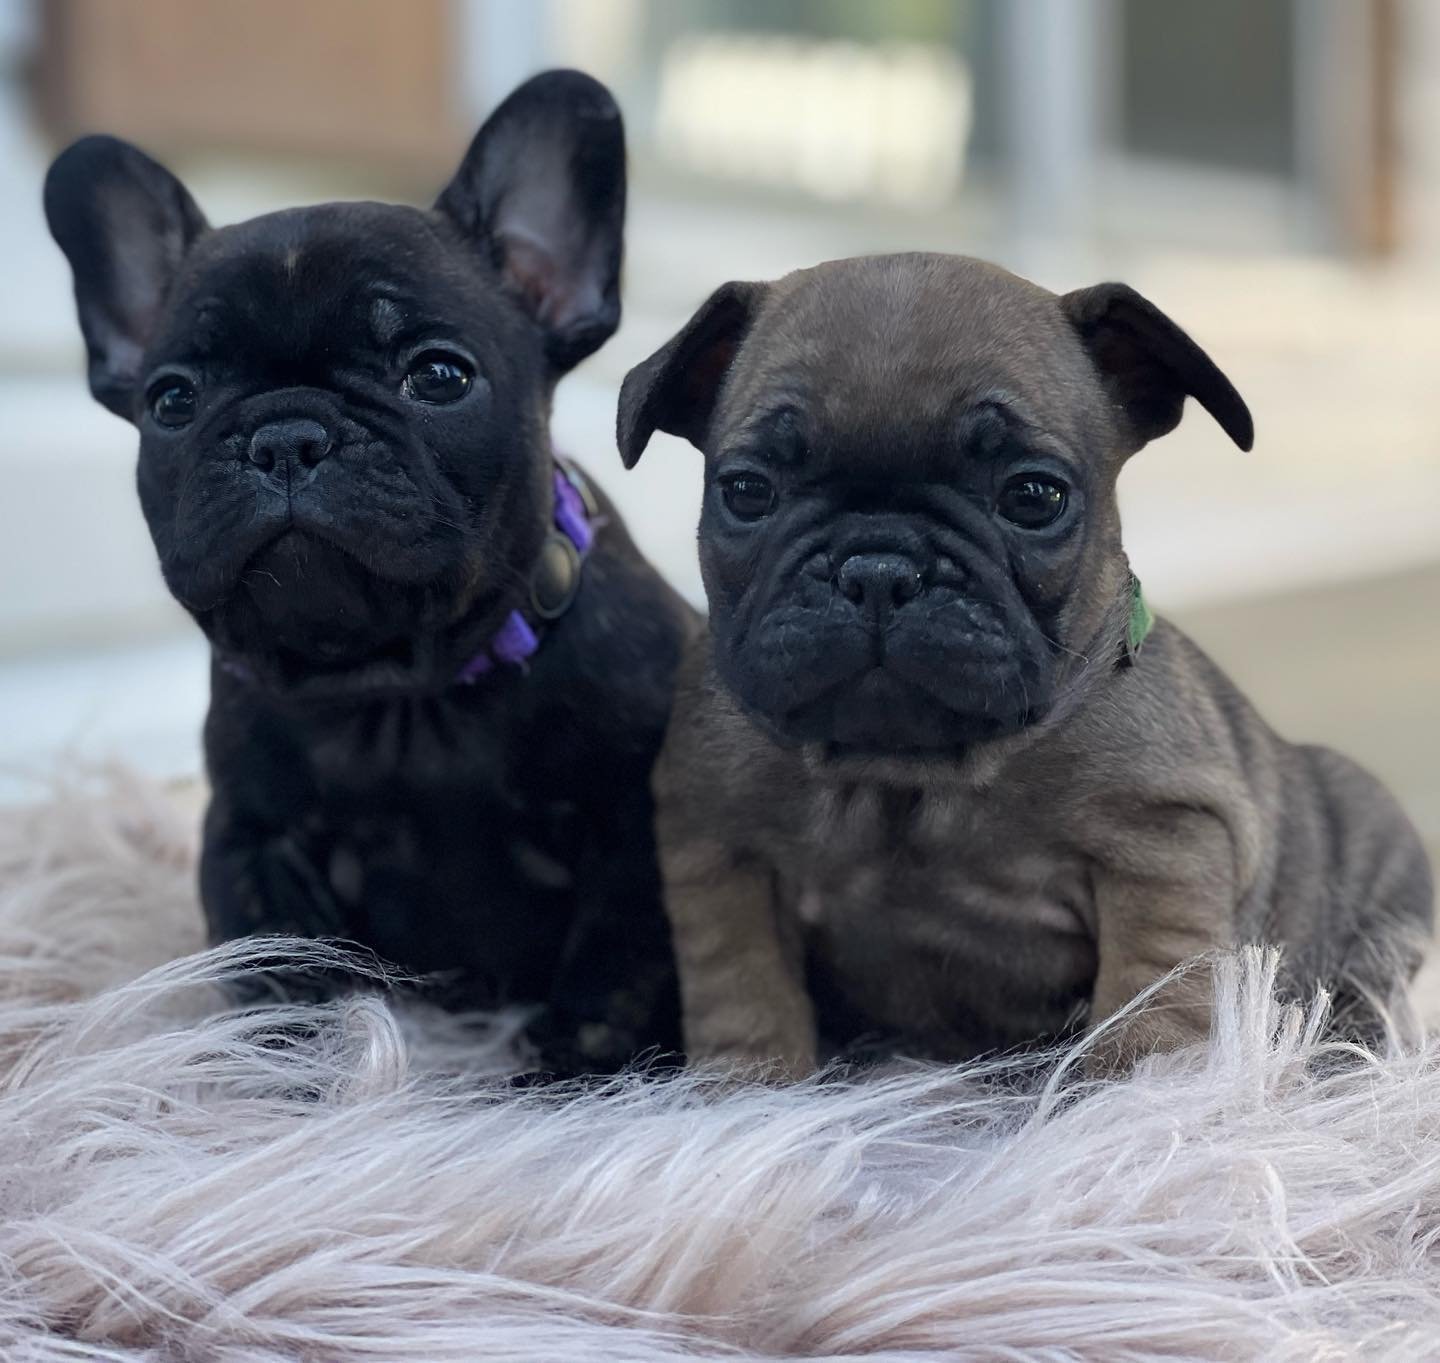 Just over here absolutely adoring these Hazel frenchie puppies! This is Rapunzel and Anna. 👸🏻 👑 #Princess #FrenchiePuppy #FrenchiePuppies #FrenchBulldogPuppy #FrenchBulldogPuppies #DrewDogs #Frenchie #FrenchBulldog